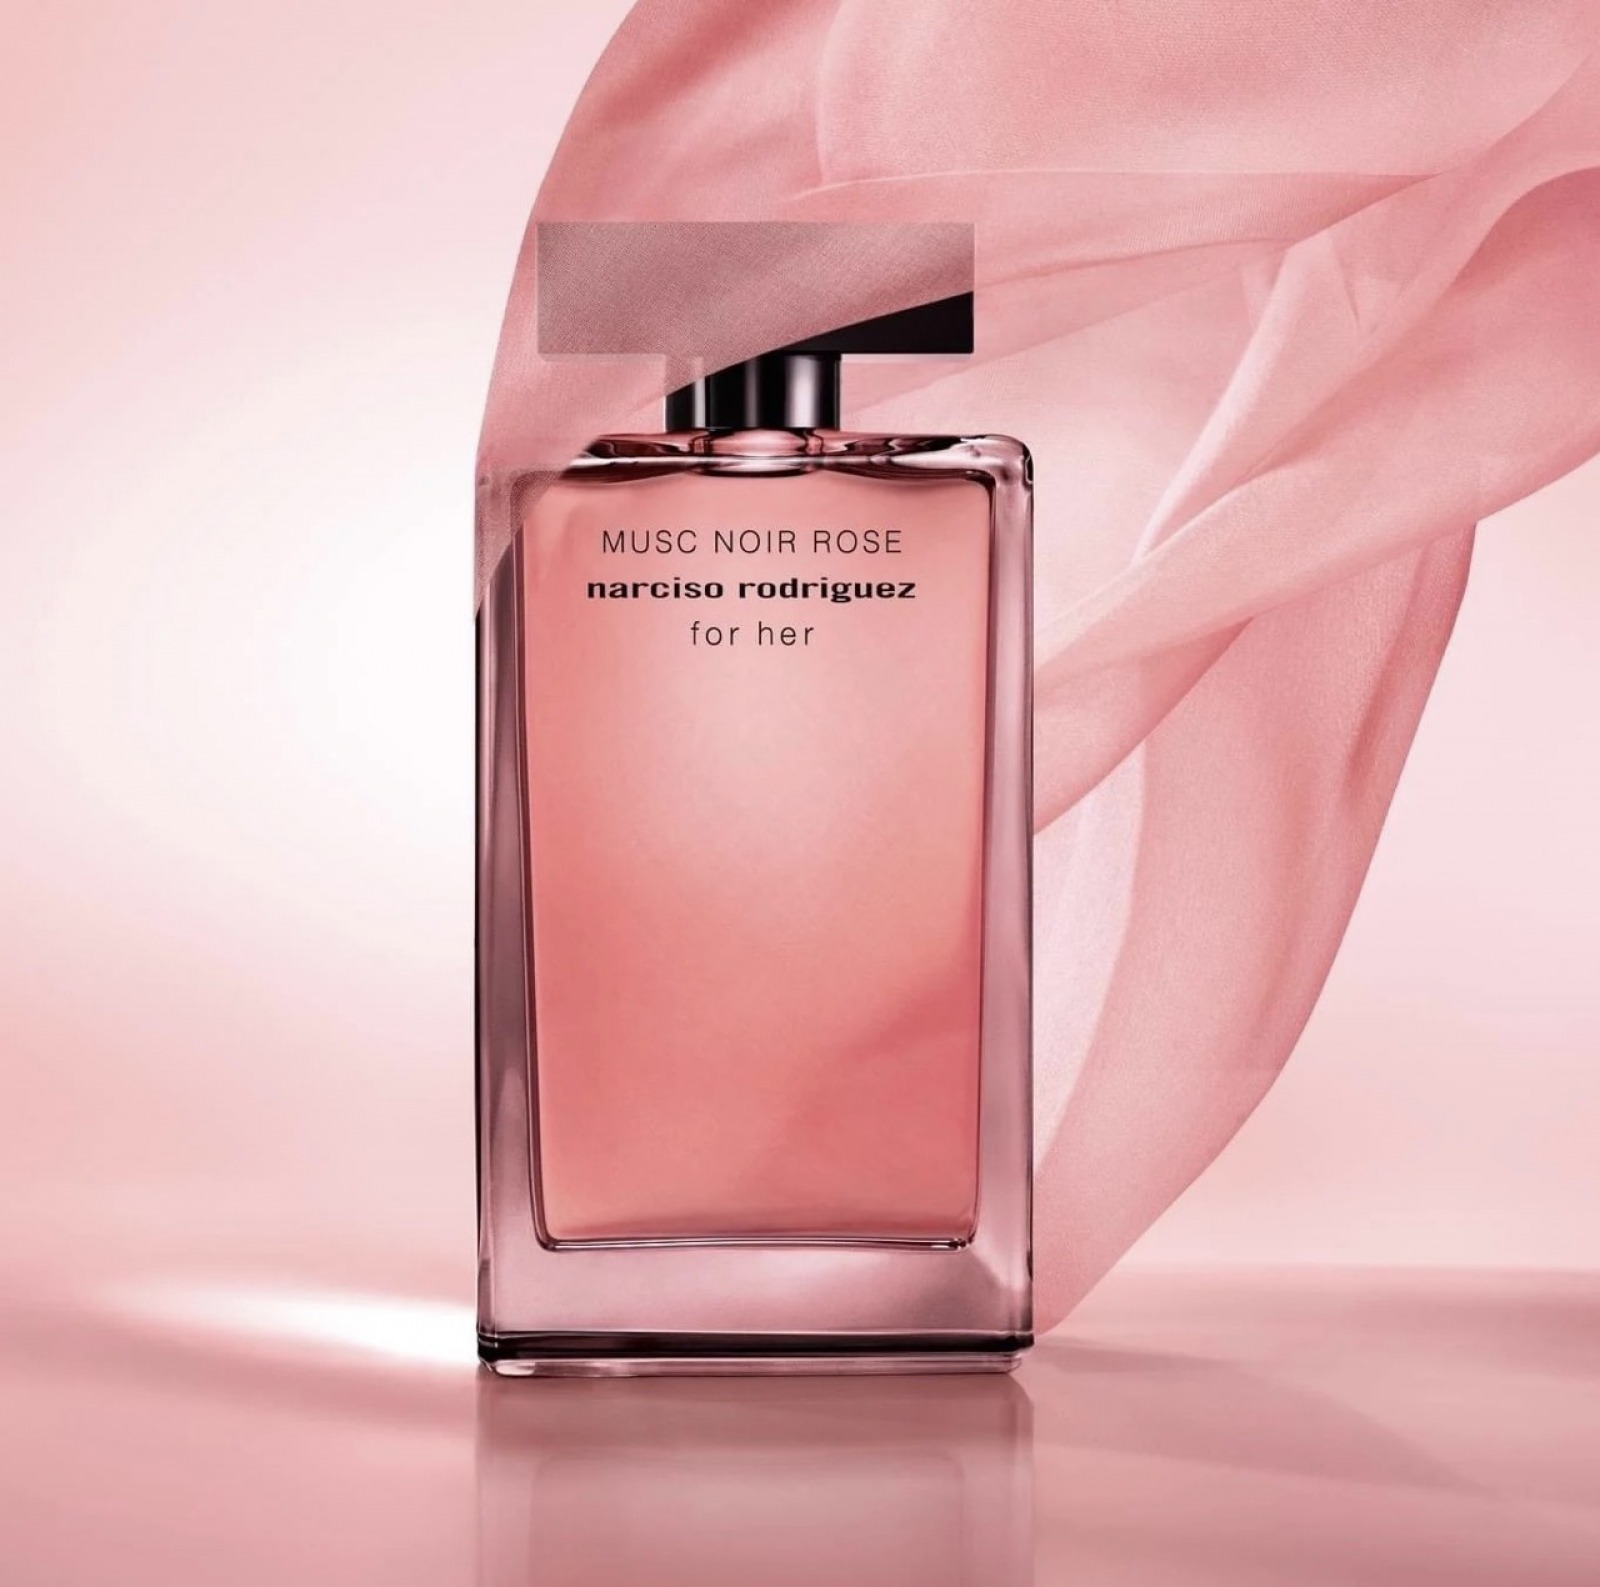 nuoc hoa narciso rodriguez musc noir rose for her edp review